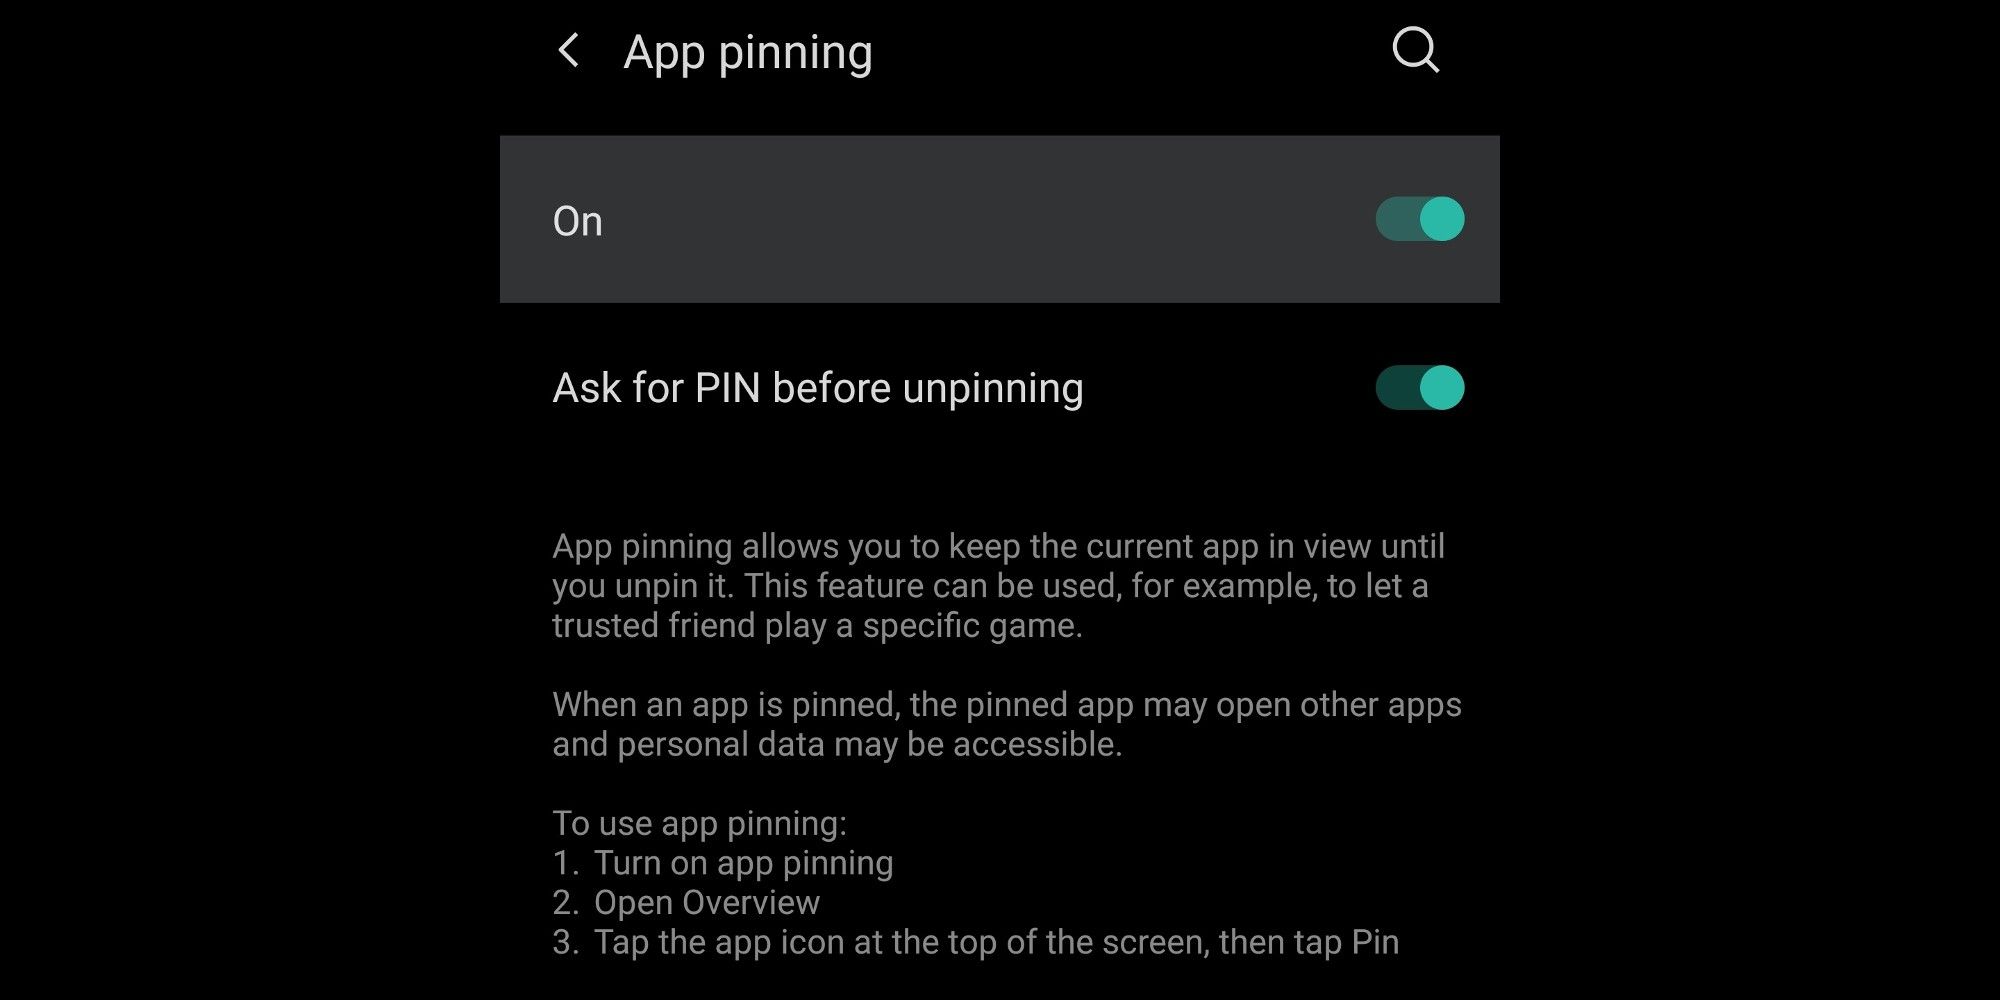 App Pinning is available on Android.